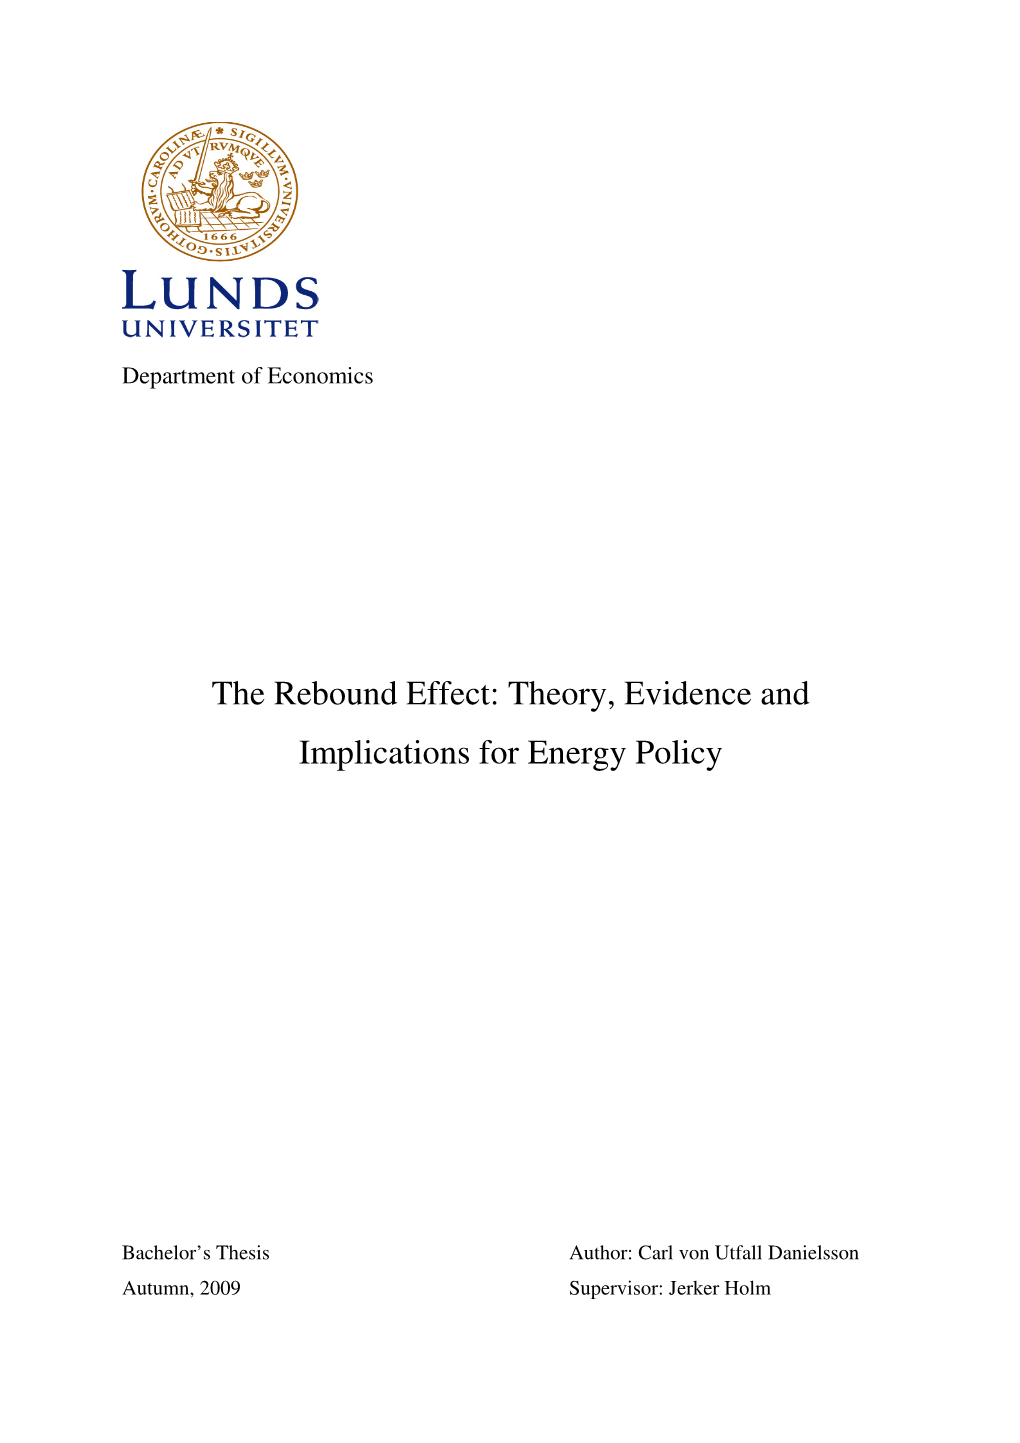 The Rebound Effect: Theory, Evidence and Implications for Energy Policy